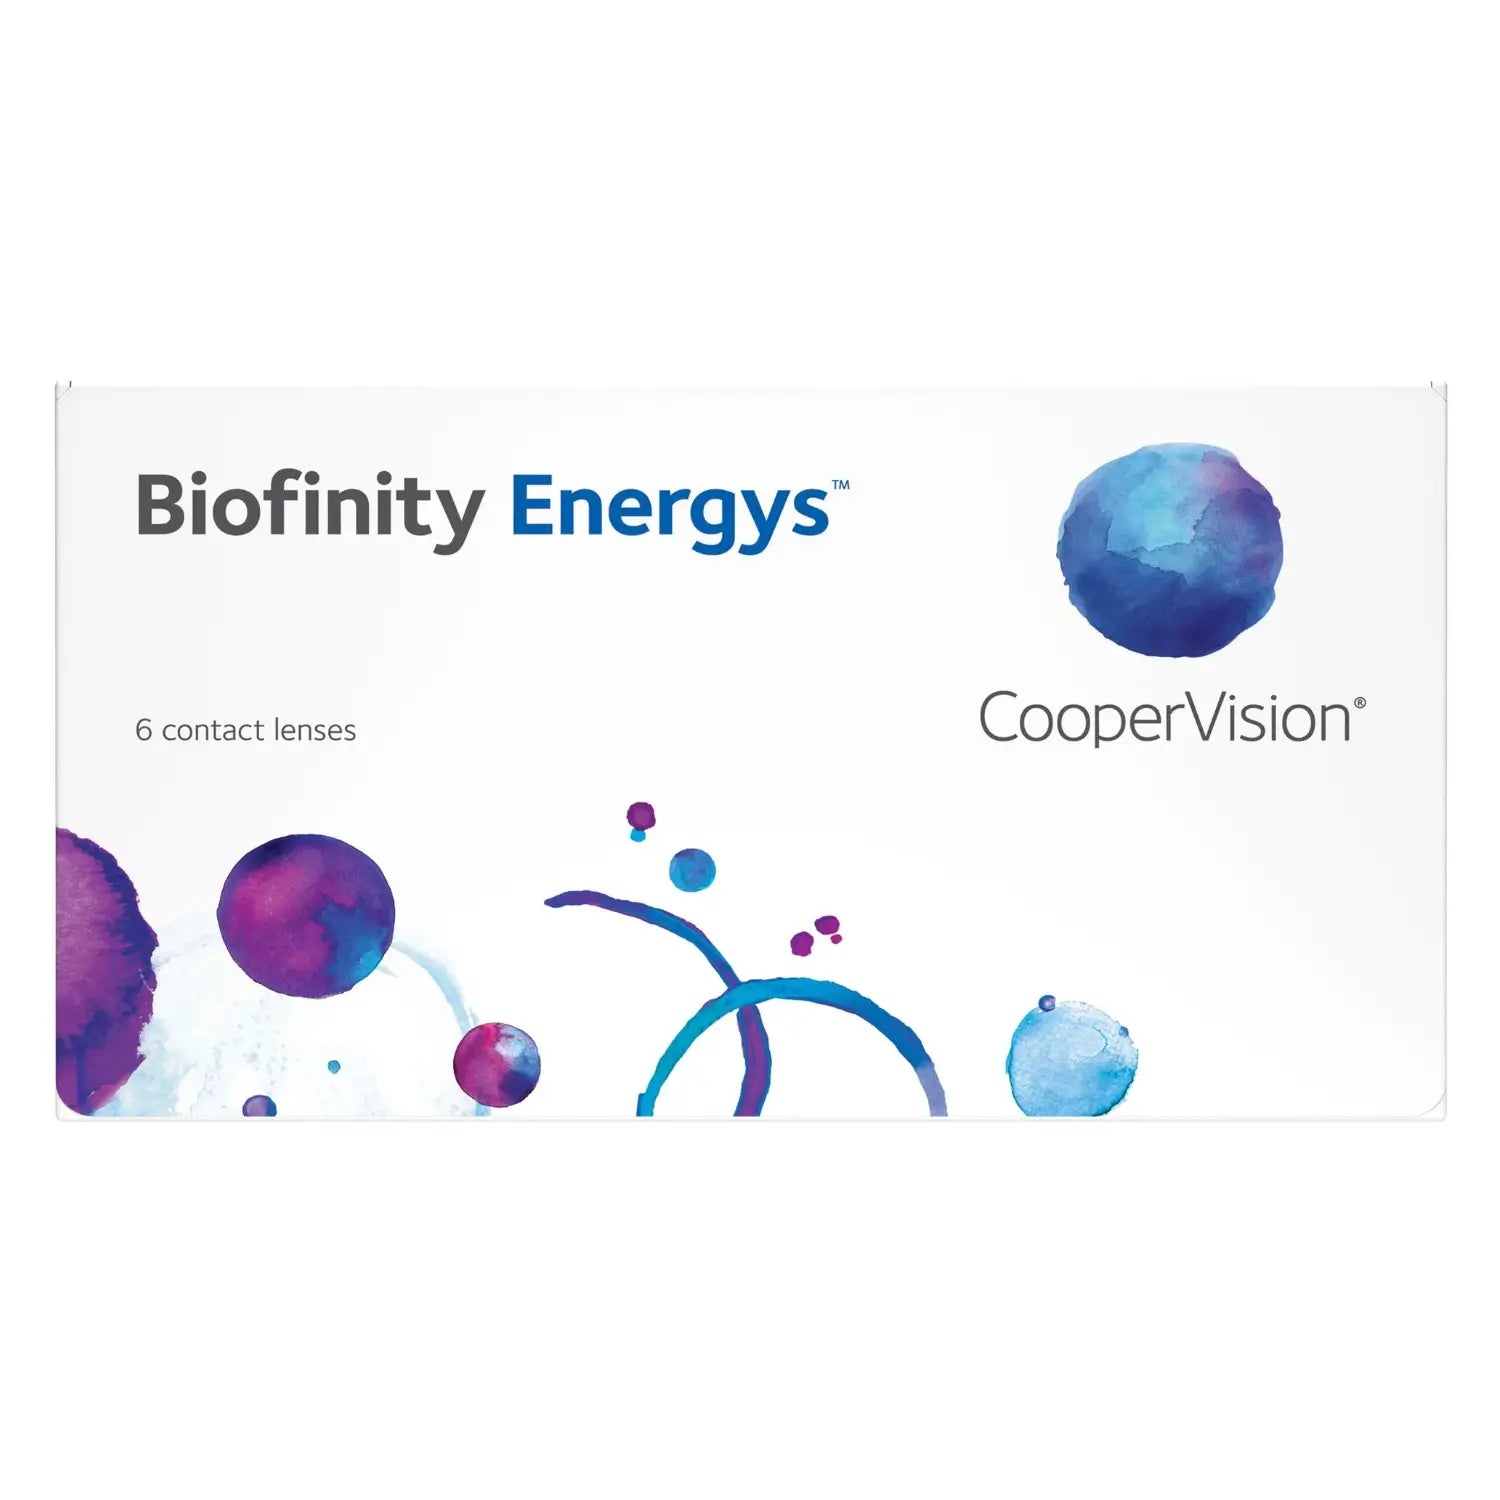 Certified Biofinity energys monthly Contact Lenses by Cooper Vision on sale online at The Optical Co at the best prices